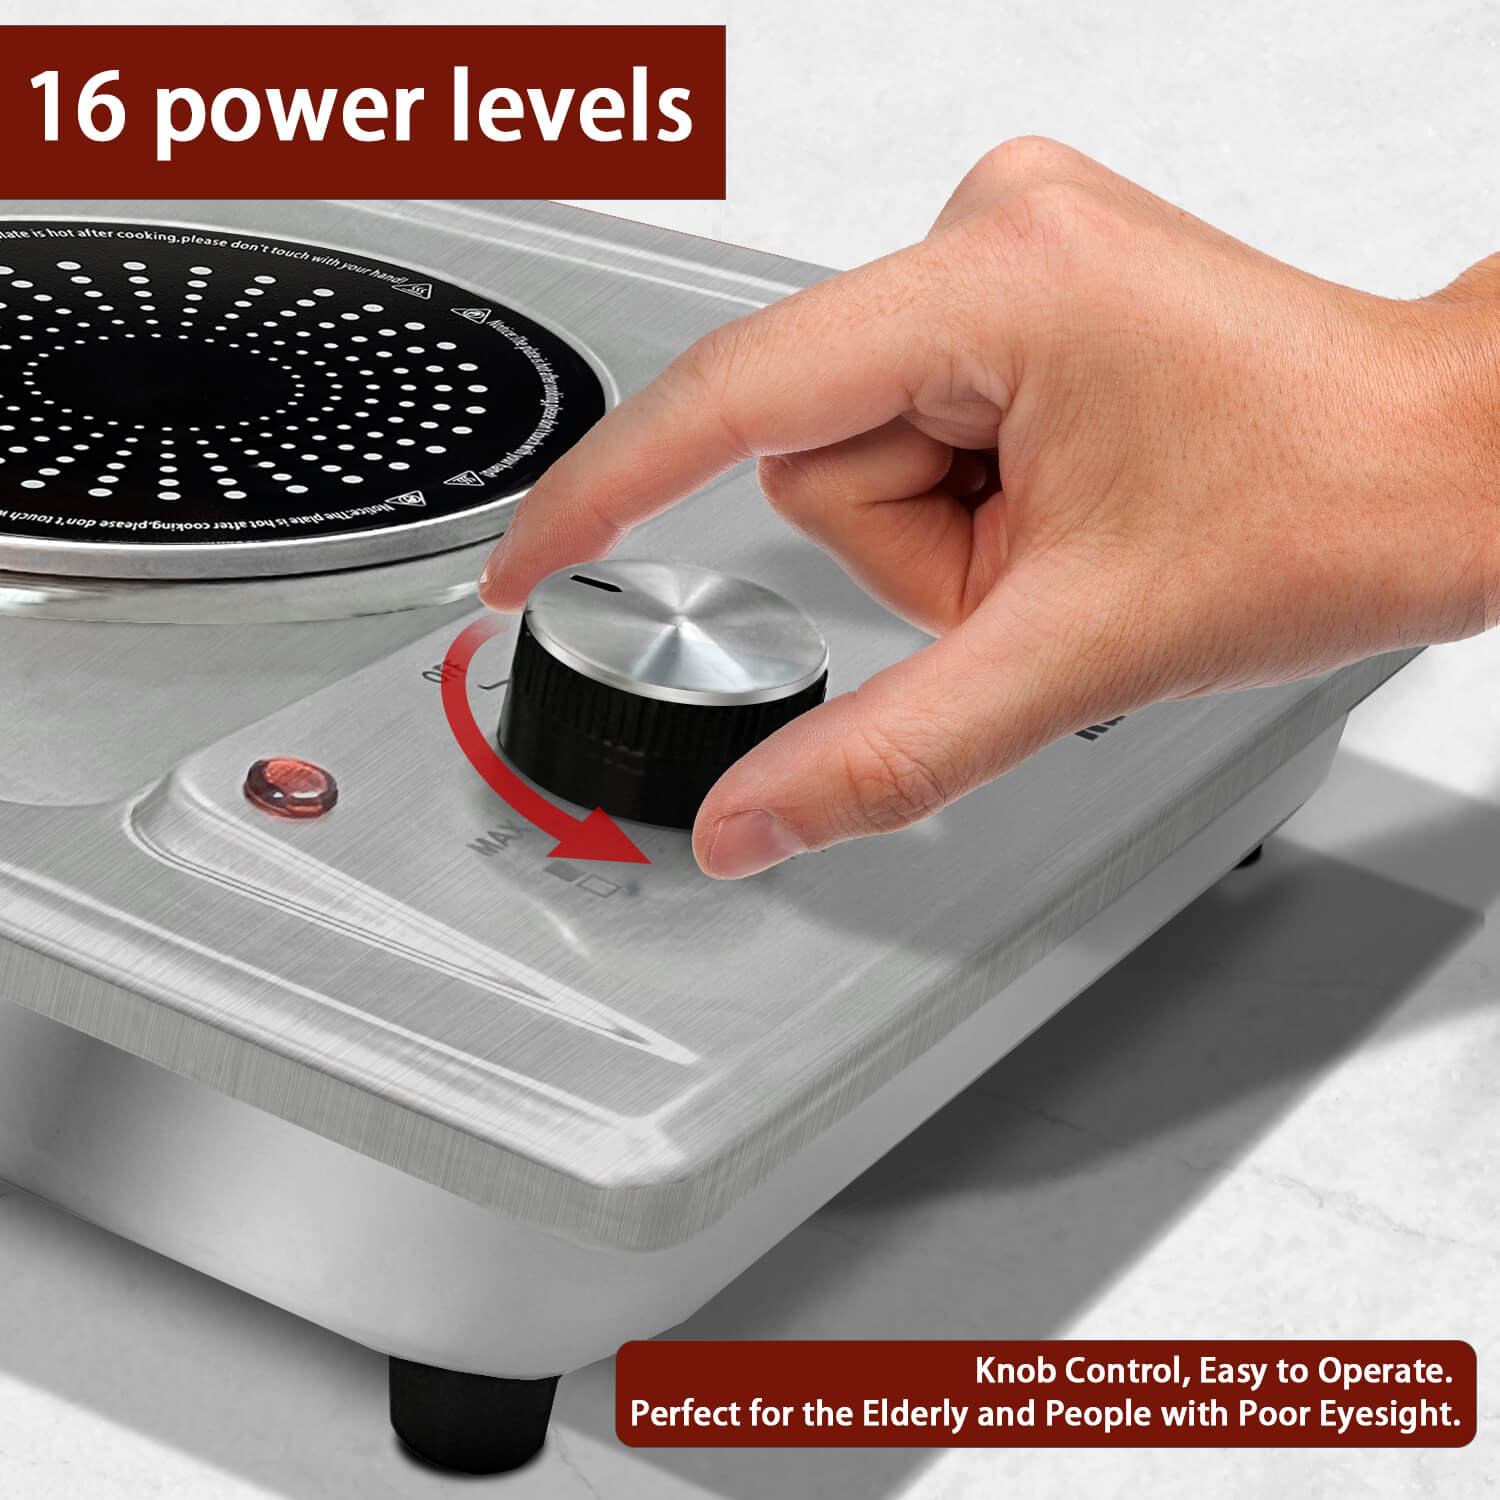 This portable electric stove is very simple to use because it has no complex functions. It only has two knobs, each of which controls a burner. Even the elderly can easily use the 120v electric cooktop. Compared with other sensor touch electric stove, I think the knob type electric stove top is more suitable for the elderly or people with poor eyesight.